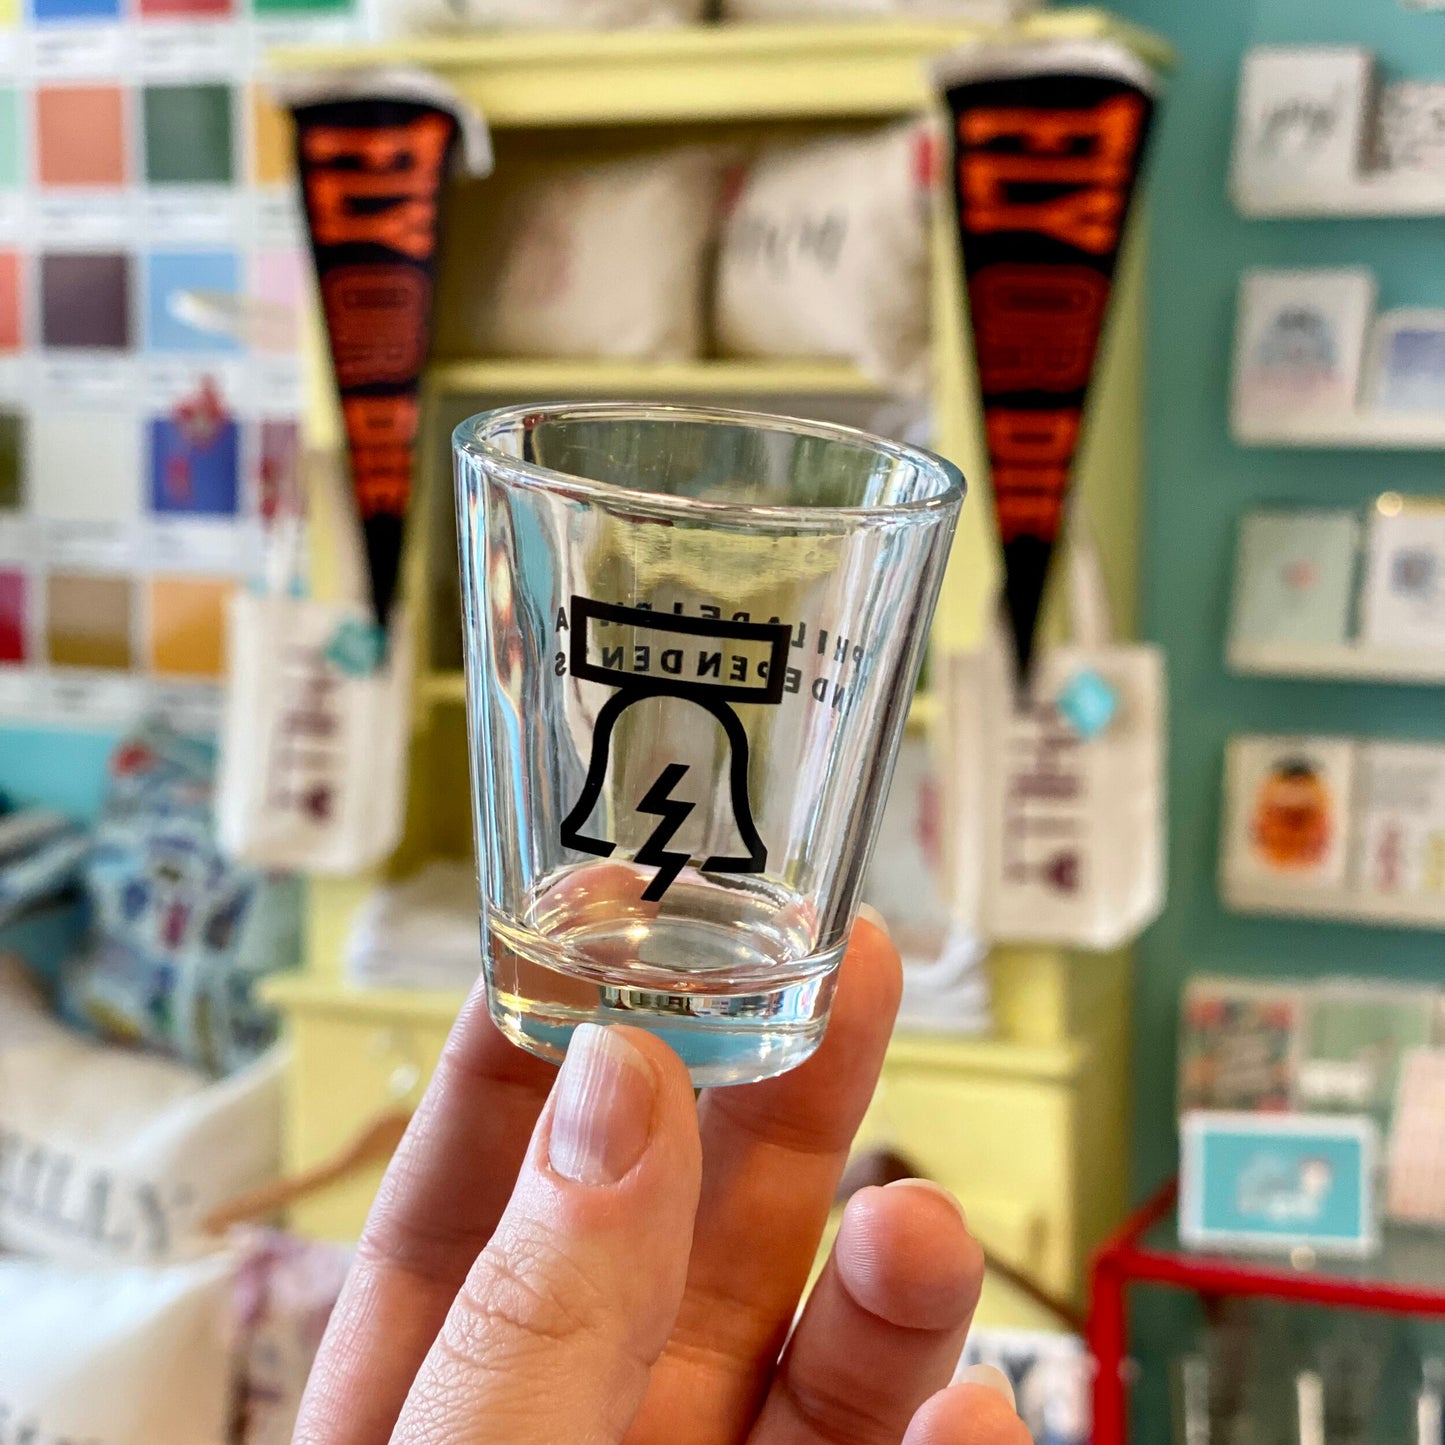 A dishwasher-safe Bell & Bolt Shot Glass with a lightning bolt design being held in a colorful Philadelphia Independents retail setting.